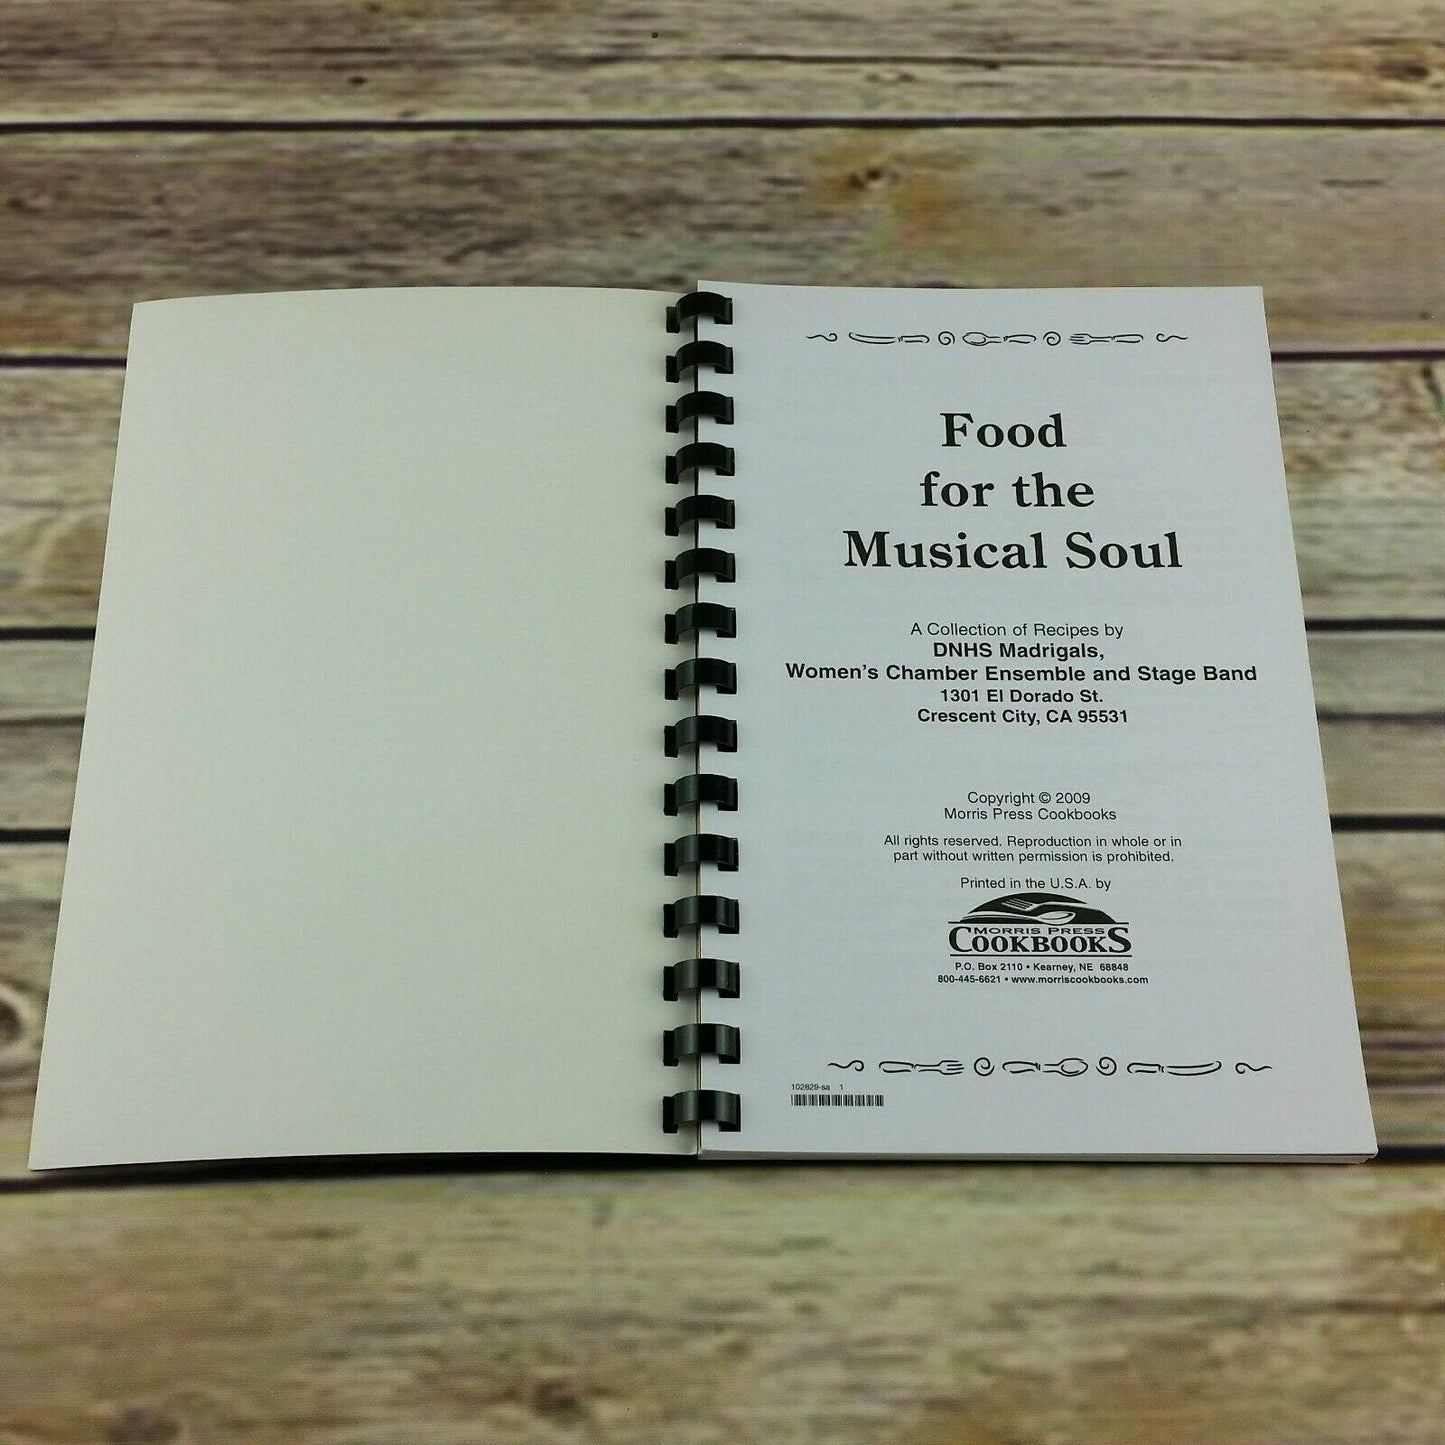 California Cookbook Del Norte High School Music Food for the Musical Soul 2009